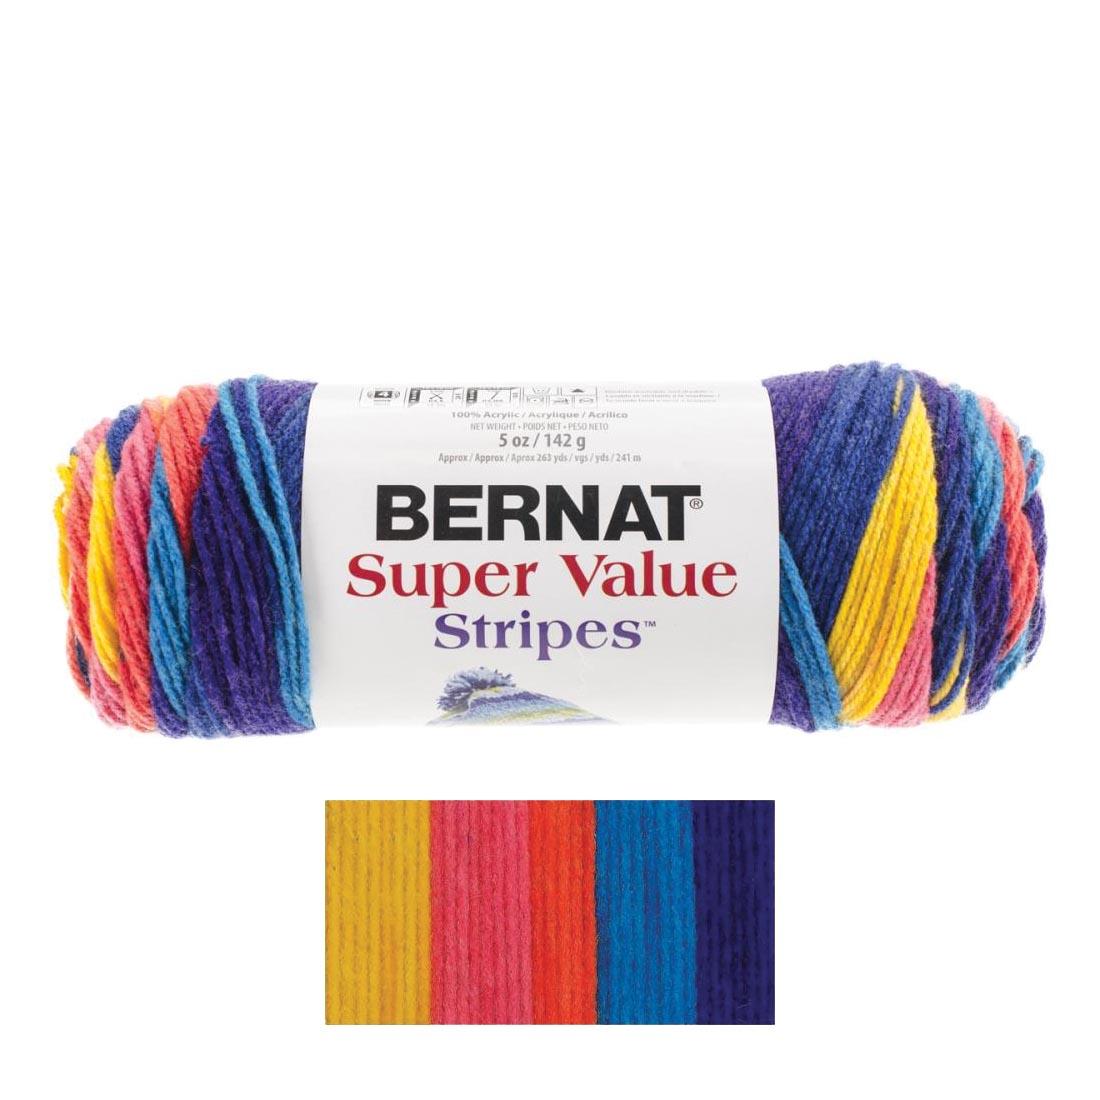 Skein of Striped Yarn with Inset of Colors Included